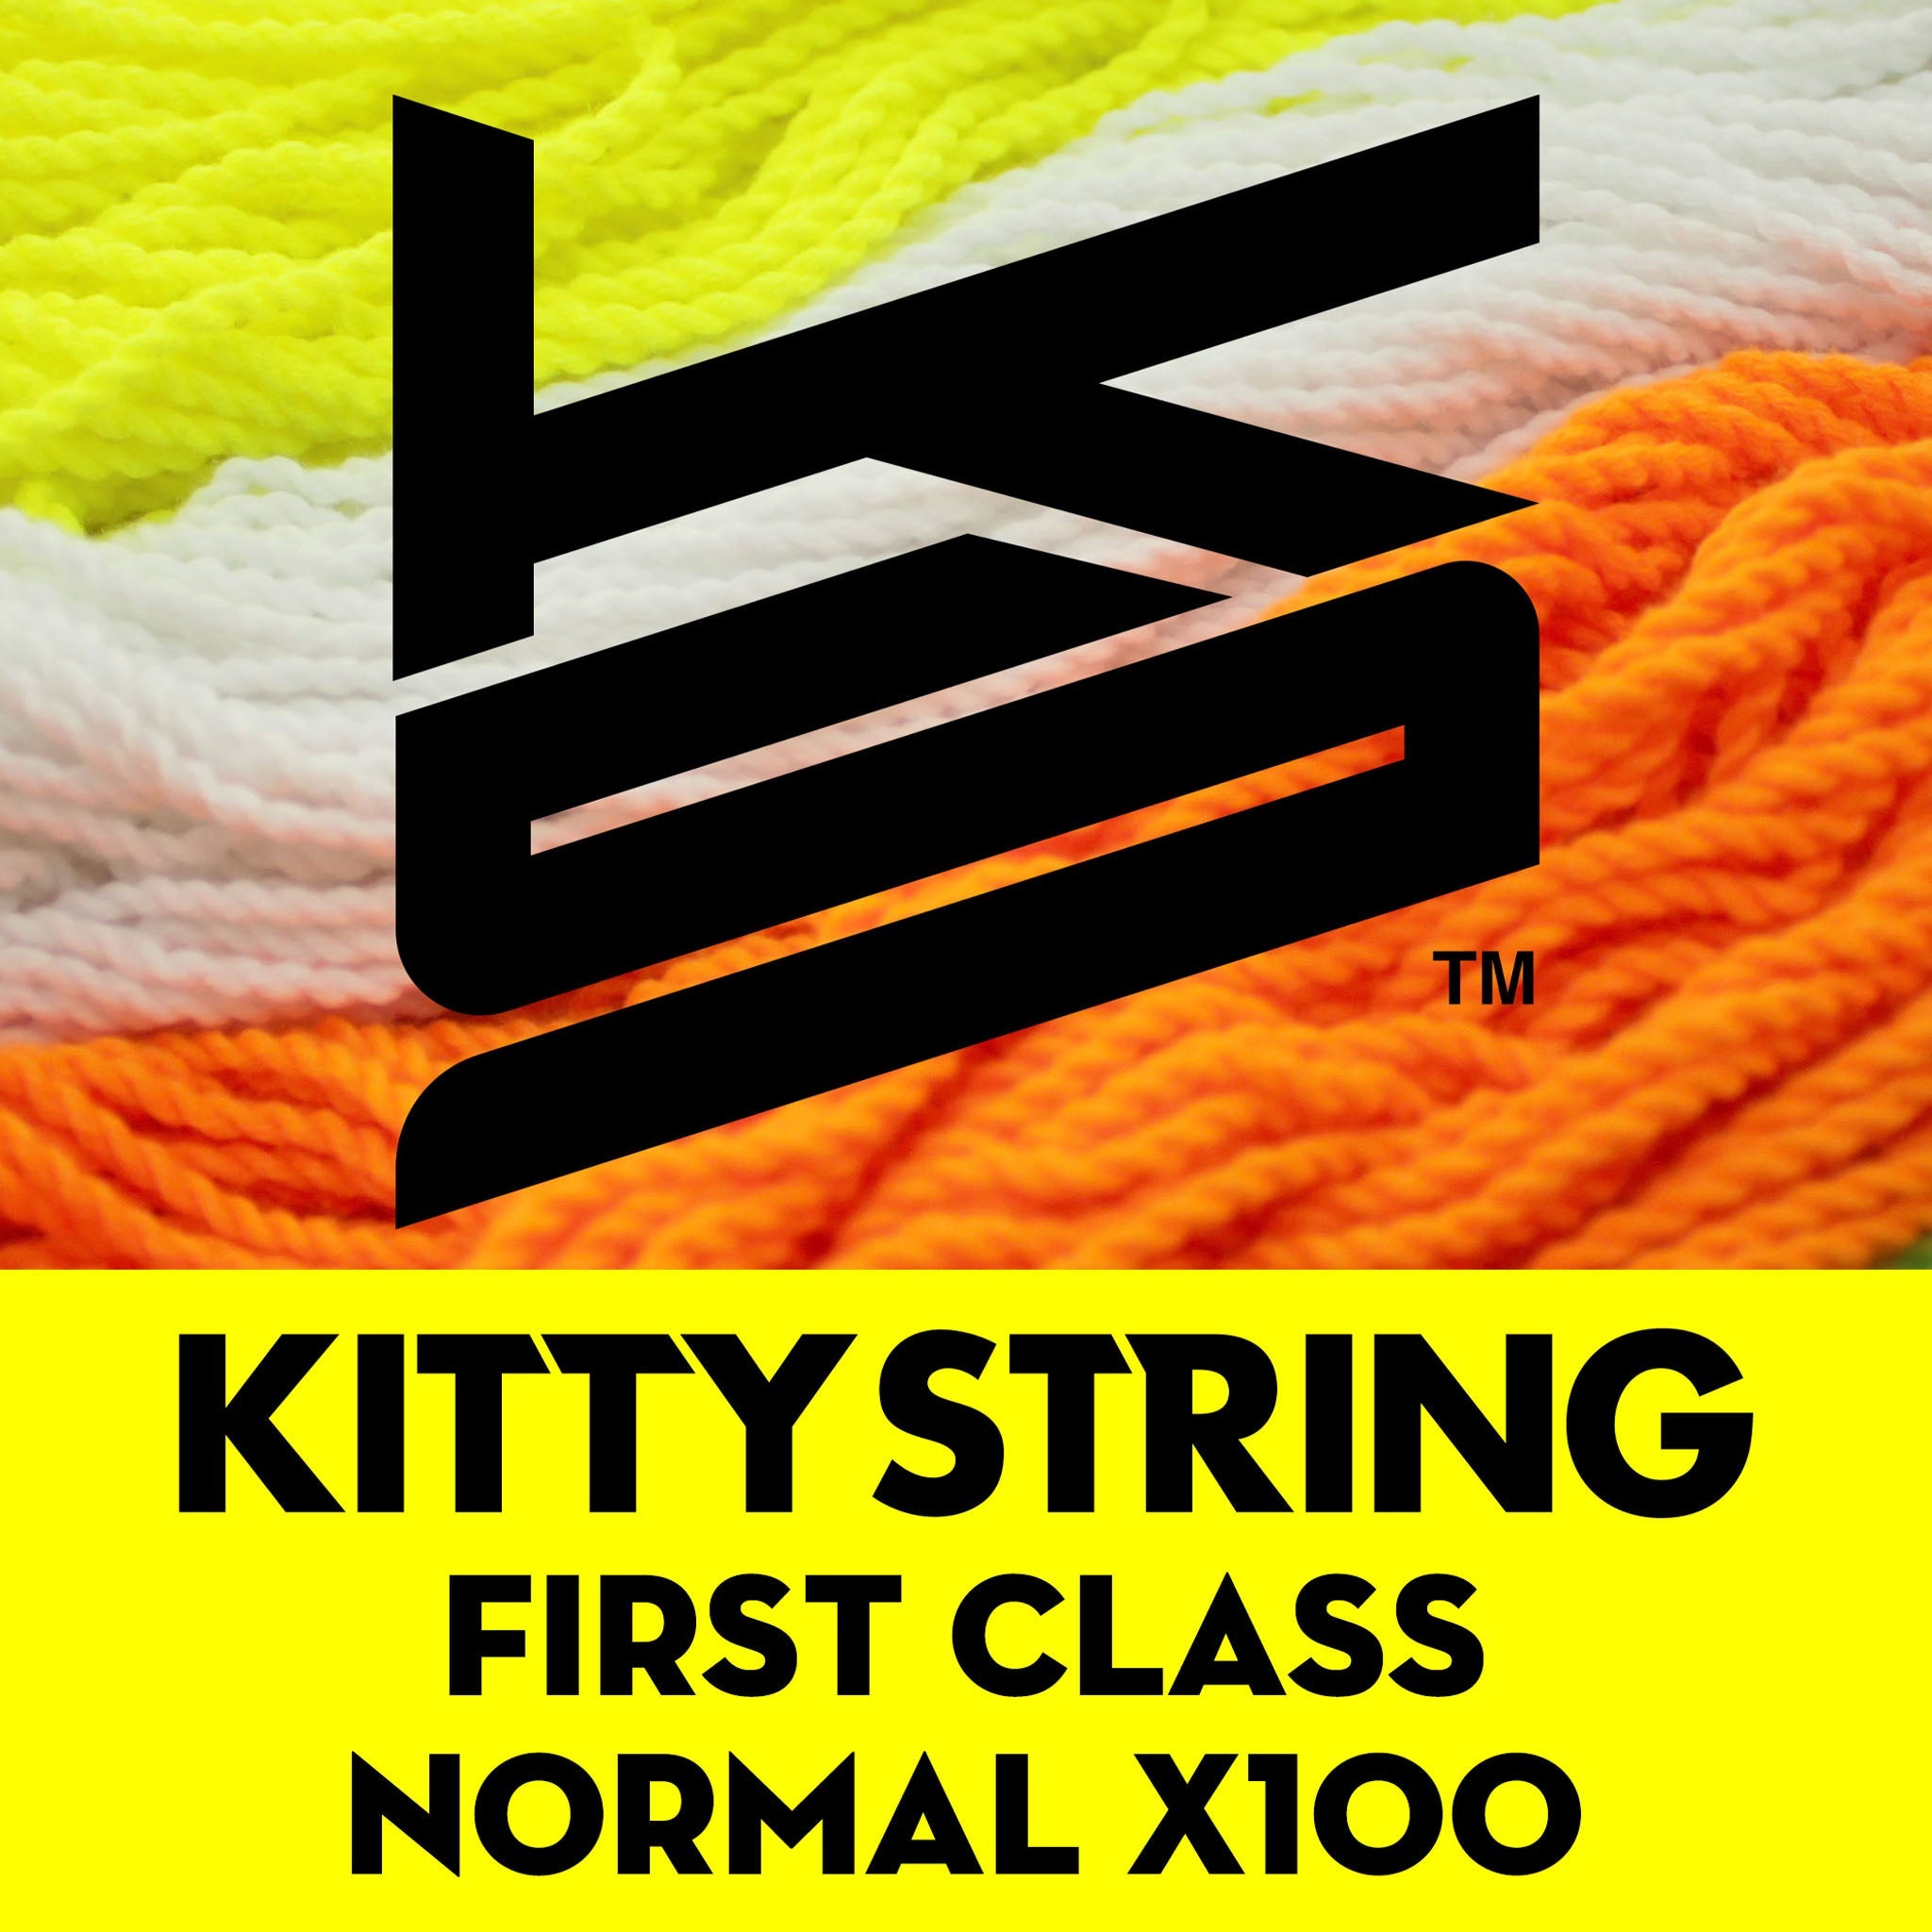 Kitty String (Poly100%) "First-Class" Normal x100